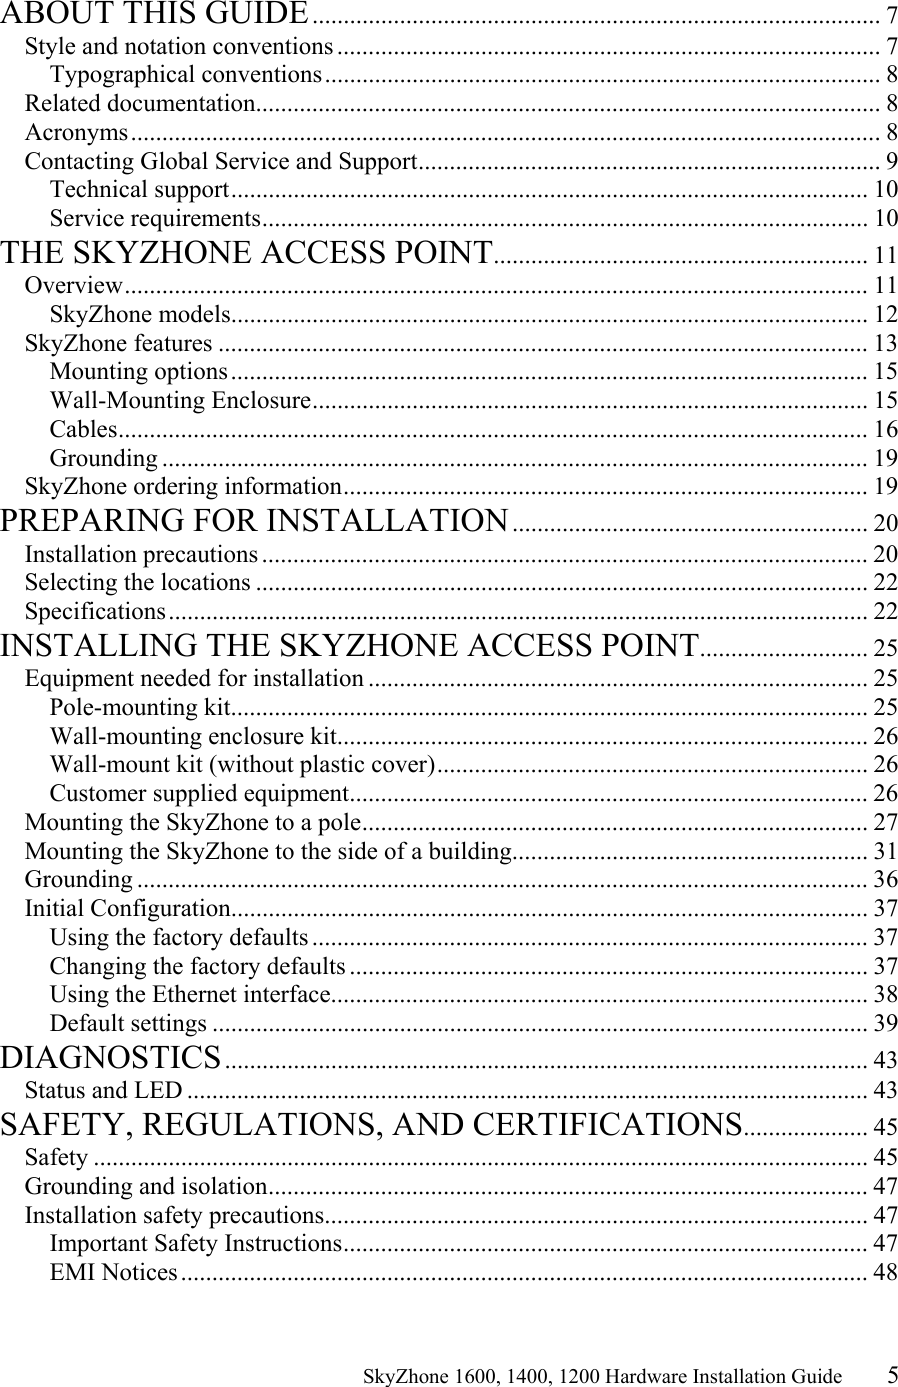                                                    SkyZhone 1600, 1400, 1200 Hardware Installation Guide 5  ABOUT THIS GUIDE........................................................................................... 7 Style and notation conventions ....................................................................................... 7 Typographical conventions......................................................................................... 8 Related documentation.................................................................................................... 8 Acronyms........................................................................................................................8 Contacting Global Service and Support.......................................................................... 9 Technical support...................................................................................................... 10 Service requirements................................................................................................. 10 THE SKYZHONE ACCESS POINT............................................................ 11 Overview....................................................................................................................... 11 SkyZhone models...................................................................................................... 12 SkyZhone features ........................................................................................................ 13 Mounting options...................................................................................................... 15 Wall-Mounting Enclosure......................................................................................... 15 Cables........................................................................................................................ 16 Grounding ................................................................................................................. 19 SkyZhone ordering information.................................................................................... 19 PREPARING FOR INSTALLATION......................................................... 20 Installation precautions ................................................................................................. 20 Selecting the locations .................................................................................................. 22 Specifications................................................................................................................ 22 INSTALLING THE SKYZHONE ACCESS POINT........................... 25 Equipment needed for installation ................................................................................ 25 Pole-mounting kit...................................................................................................... 25 Wall-mounting enclosure kit..................................................................................... 26 Wall-mount kit (without plastic cover)..................................................................... 26 Customer supplied equipment................................................................................... 26 Mounting the SkyZhone to a pole................................................................................. 27 Mounting the SkyZhone to the side of a building......................................................... 31 Grounding ..................................................................................................................... 36 Initial Configuration...................................................................................................... 37 Using the factory defaults ......................................................................................... 37 Changing the factory defaults ................................................................................... 37 Using the Ethernet interface...................................................................................... 38 Default settings ......................................................................................................... 39 DIAGNOSTICS....................................................................................................... 43 Status and LED ............................................................................................................. 43 SAFETY, REGULATIONS, AND CERTIFICATIONS.................... 45 Safety ............................................................................................................................ 45 Grounding and isolation................................................................................................ 47 Installation safety precautions....................................................................................... 47 Important Safety Instructions.................................................................................... 47 EMI Notices.............................................................................................................. 48 